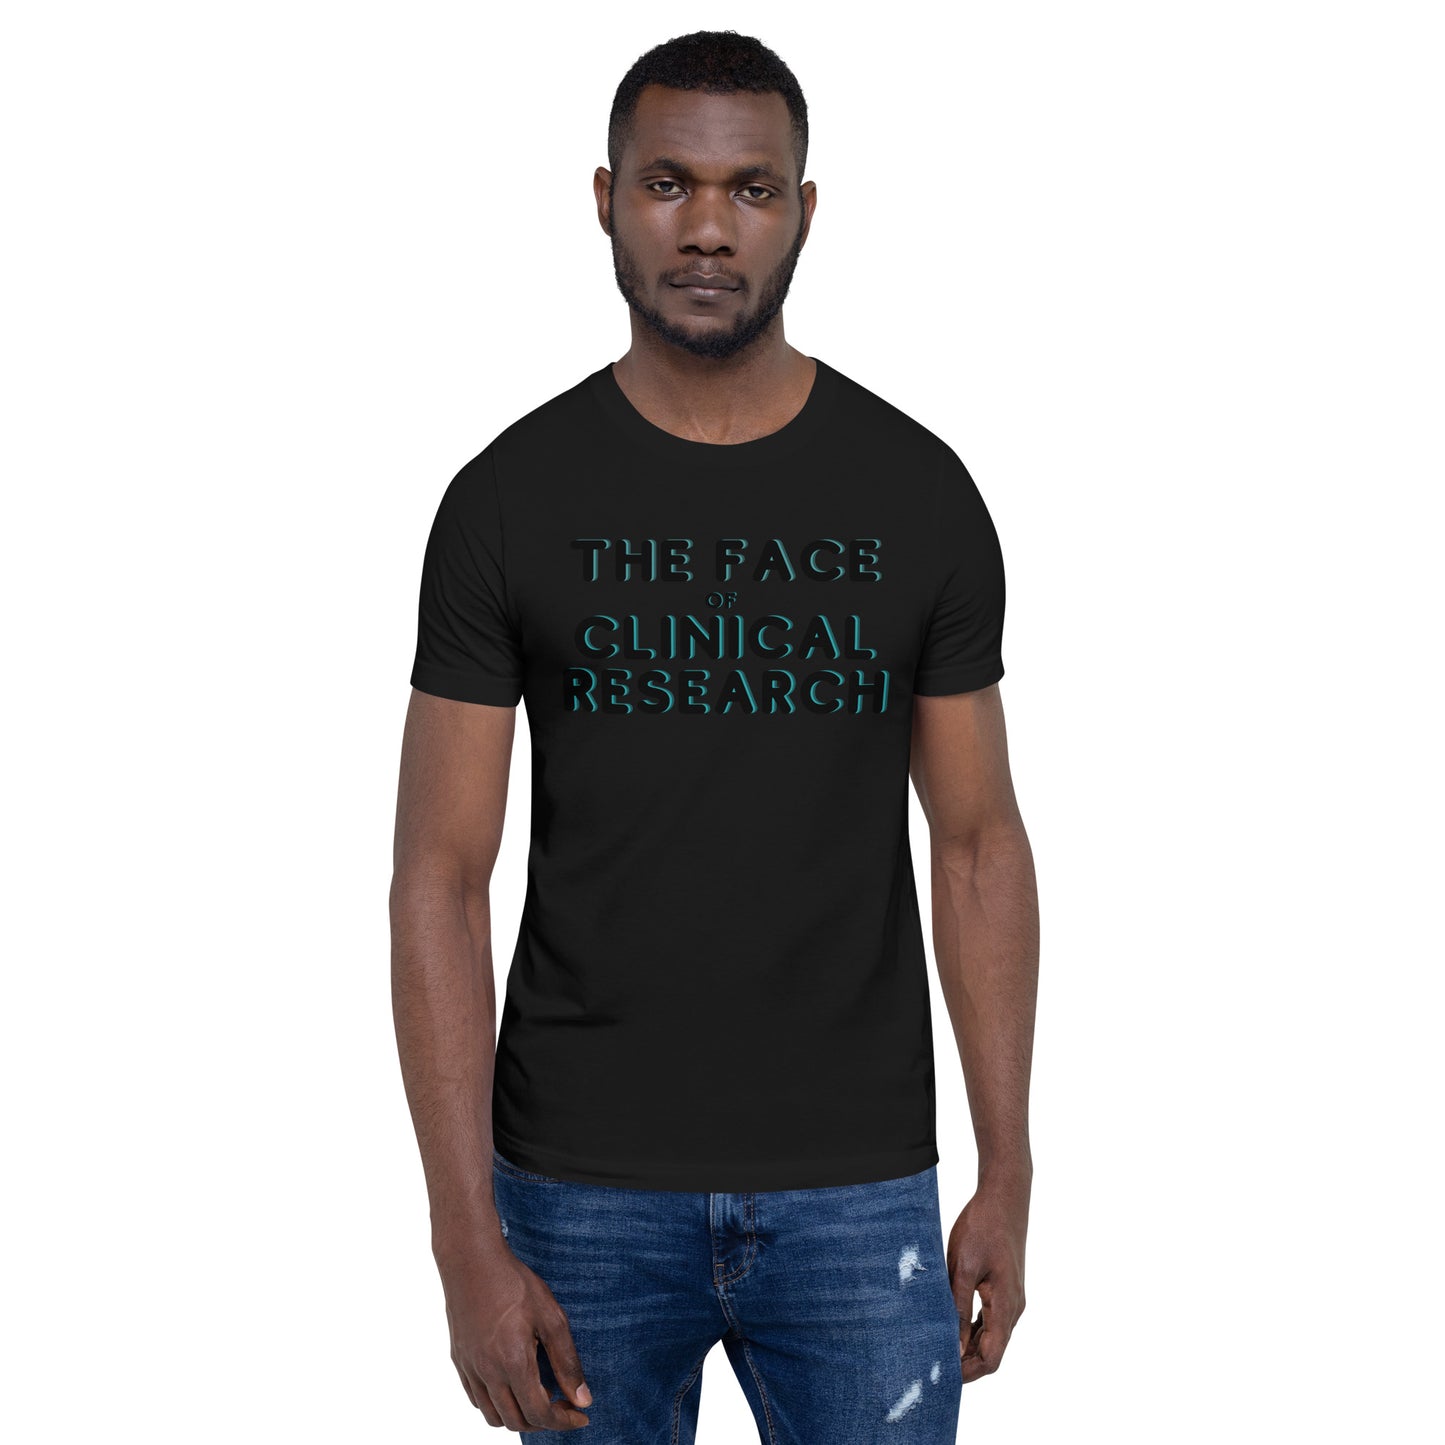 The FACE of Clinical Research Unisex t-shirt